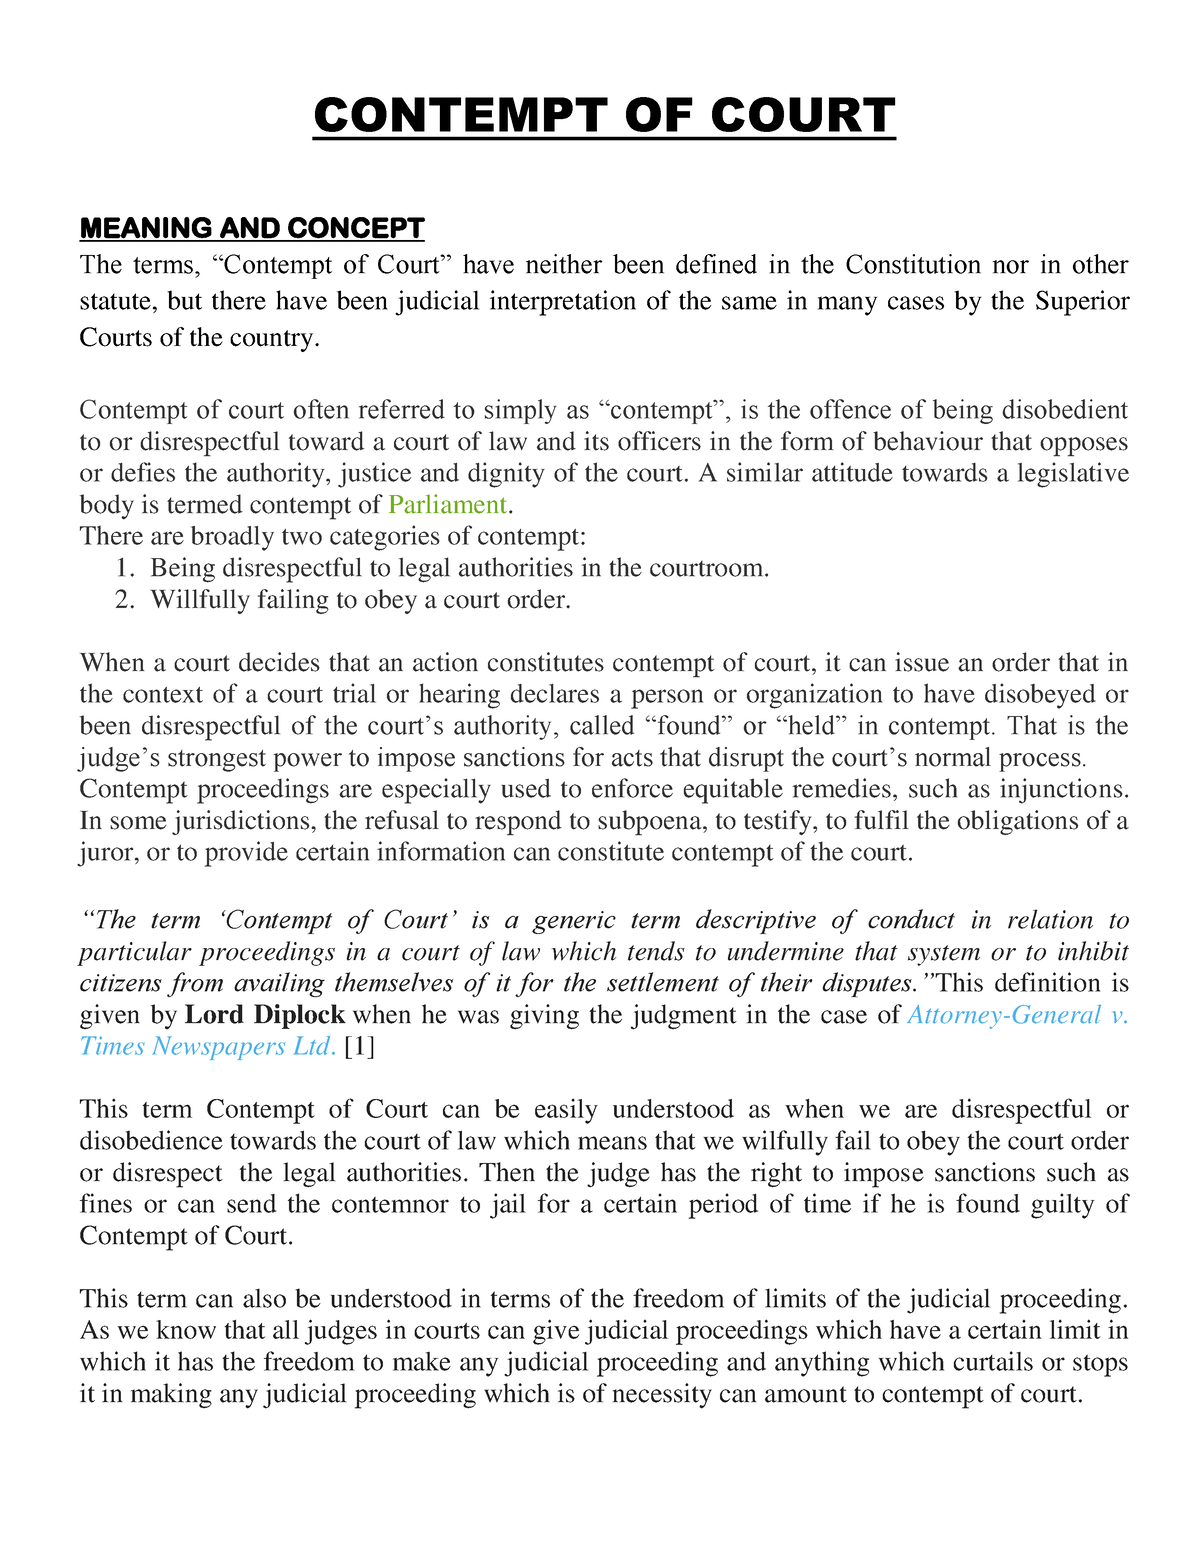 Contempt OF Court Detailed Notes CONTEMPT OF COURT MEANING AND